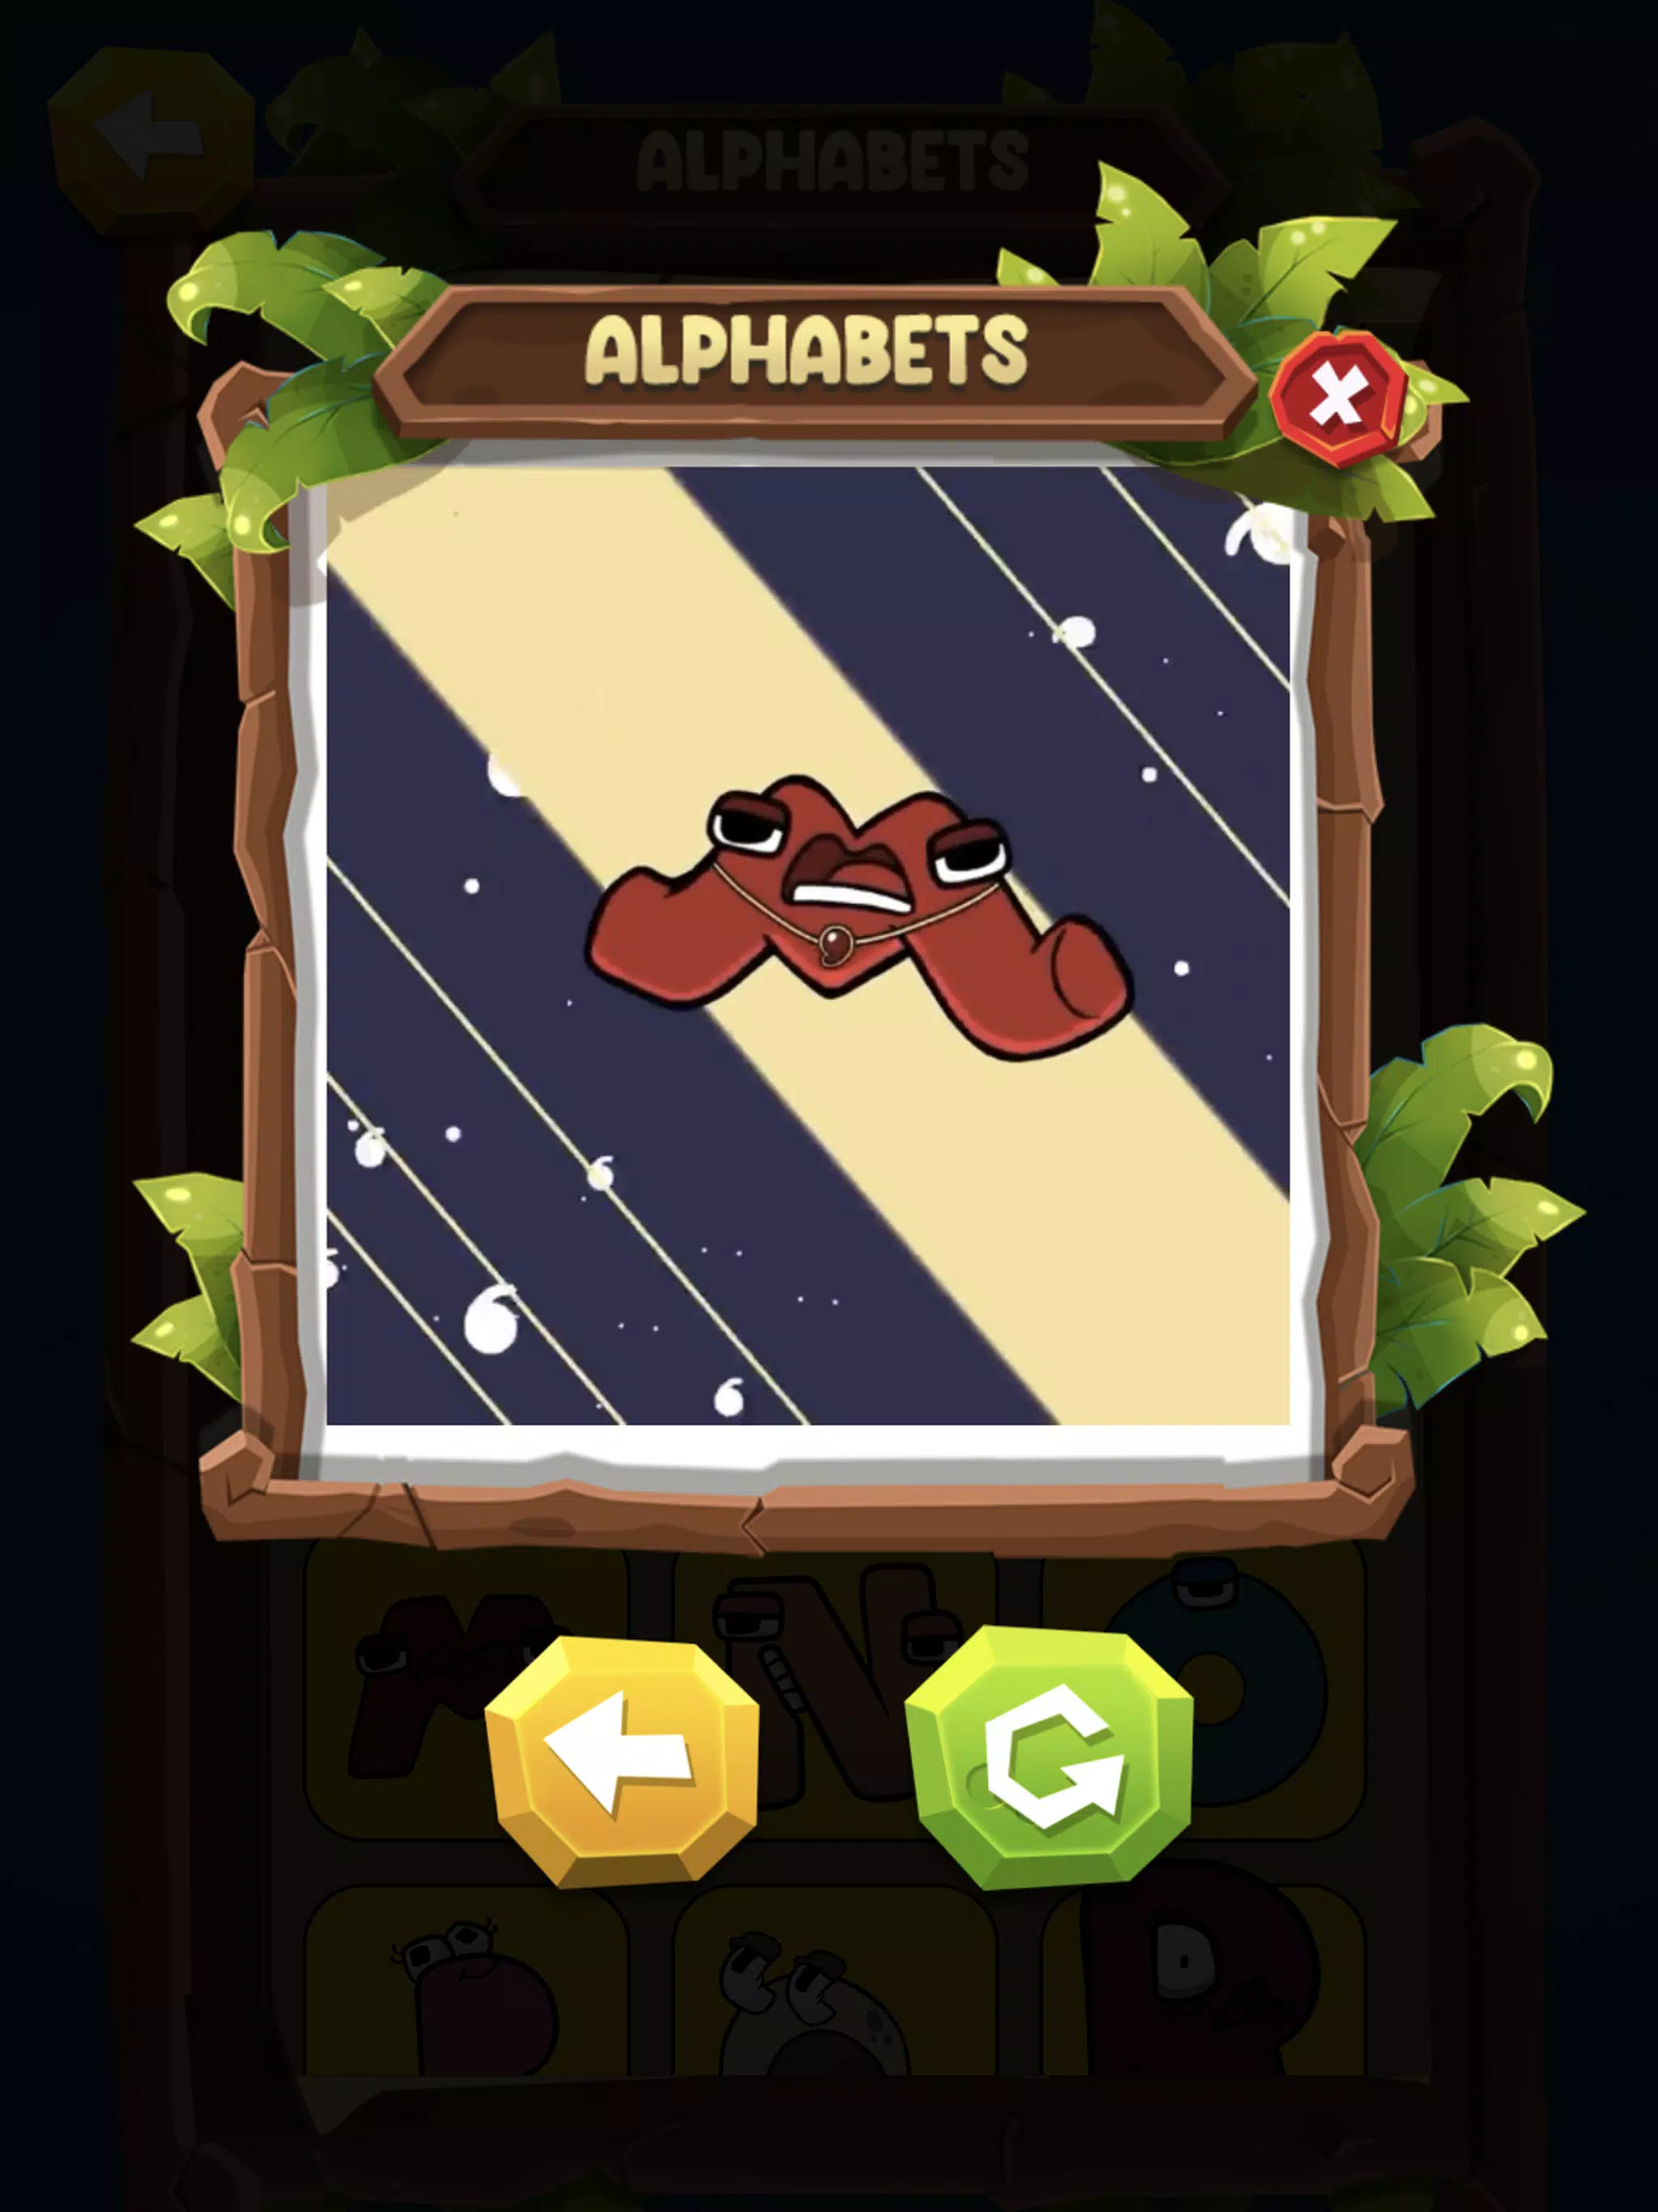 Alphabet Lore for Android - Download